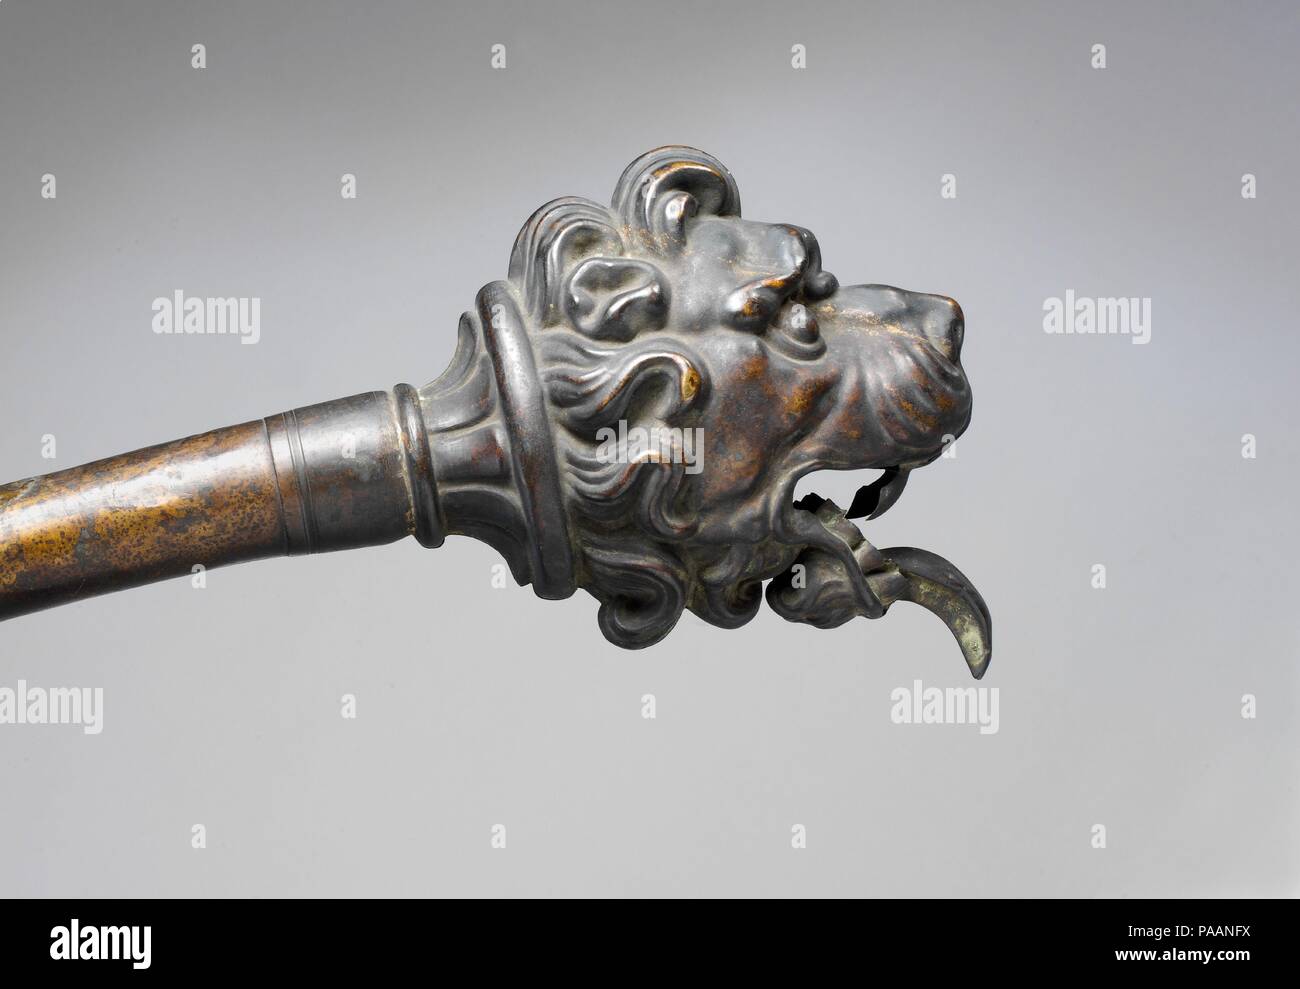 Serpon En Metallo. Culture: Italian. Dimensions: Height (From head to U-bend): 22 1/16 in. (56. cm)  Diameter (Of bell at gargoyle mouth opening): 11 13/16 in. (30 cm). Maker: Attributed to Leopoldo Franciolini (Italian, Florence 1844-1920 Florence). Date: 19th century. Museum: Metropolitan Museum of Art, New York, USA. Stock Photo